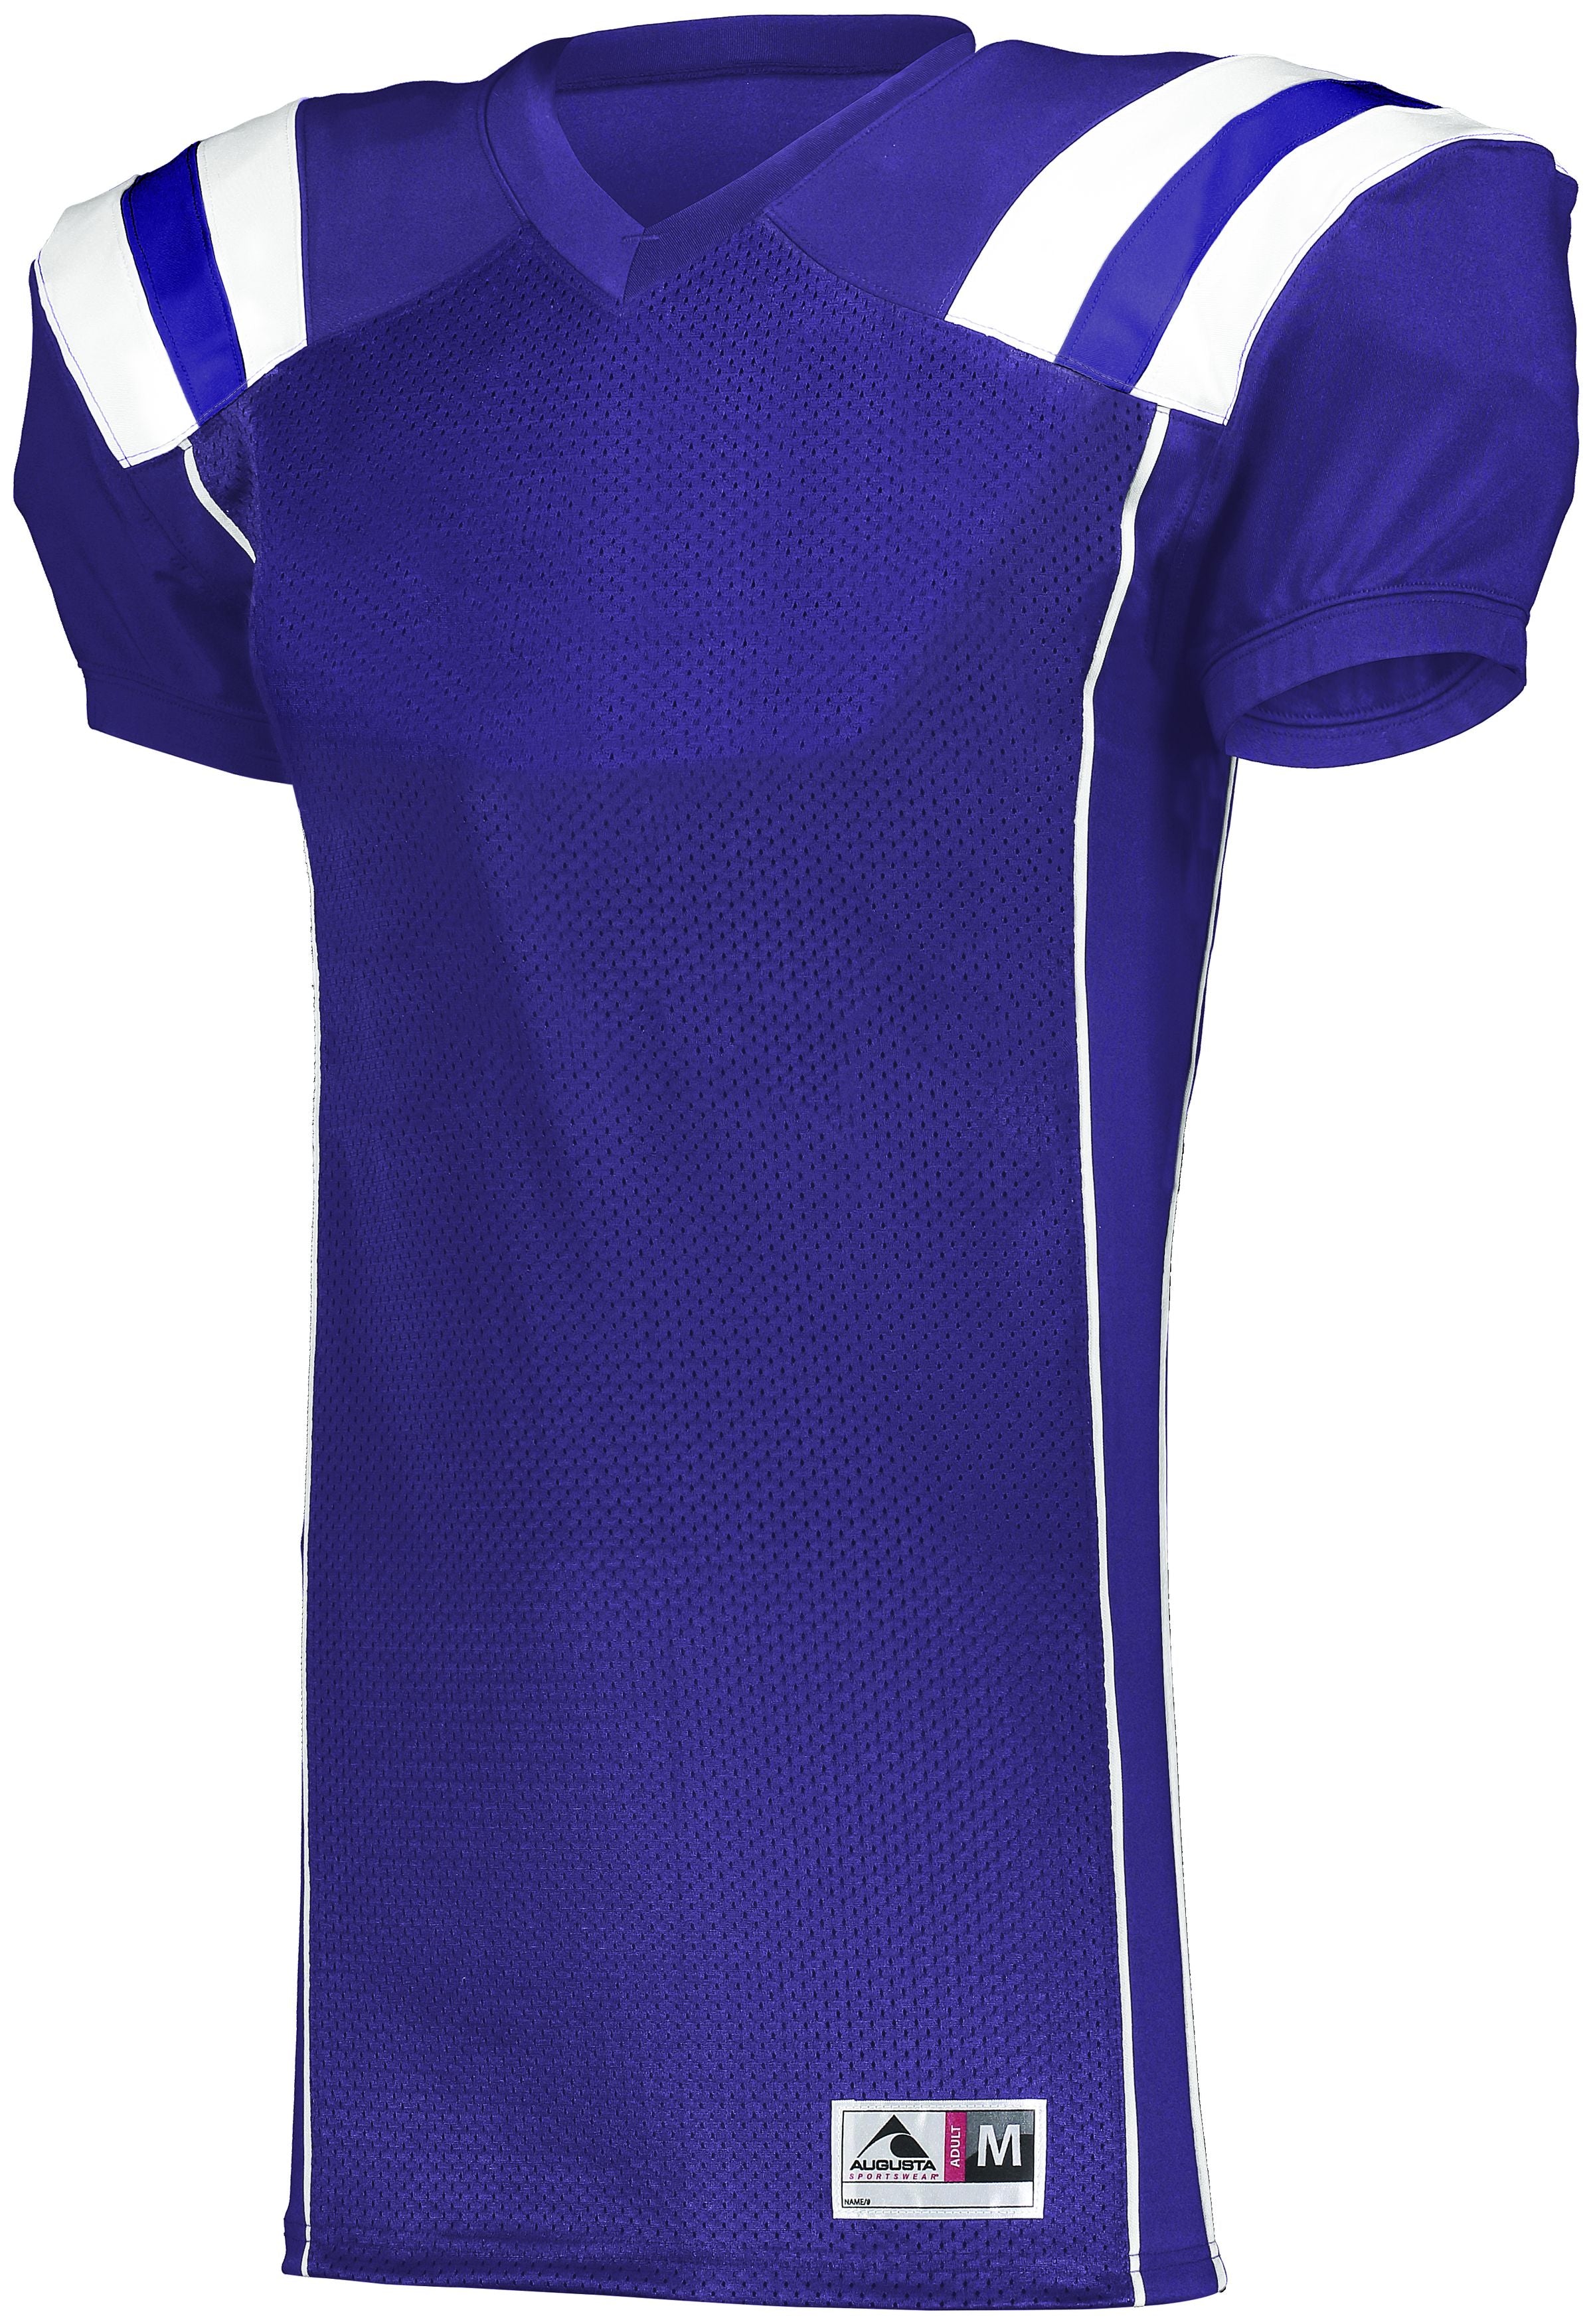 Augusta Sportswear Youth Tform Football Jersey in Purple/White  -Part of the Youth, Youth-Jersey, Augusta-Products, Football, Shirts, All-Sports, All-Sports-1 product lines at KanaleyCreations.com